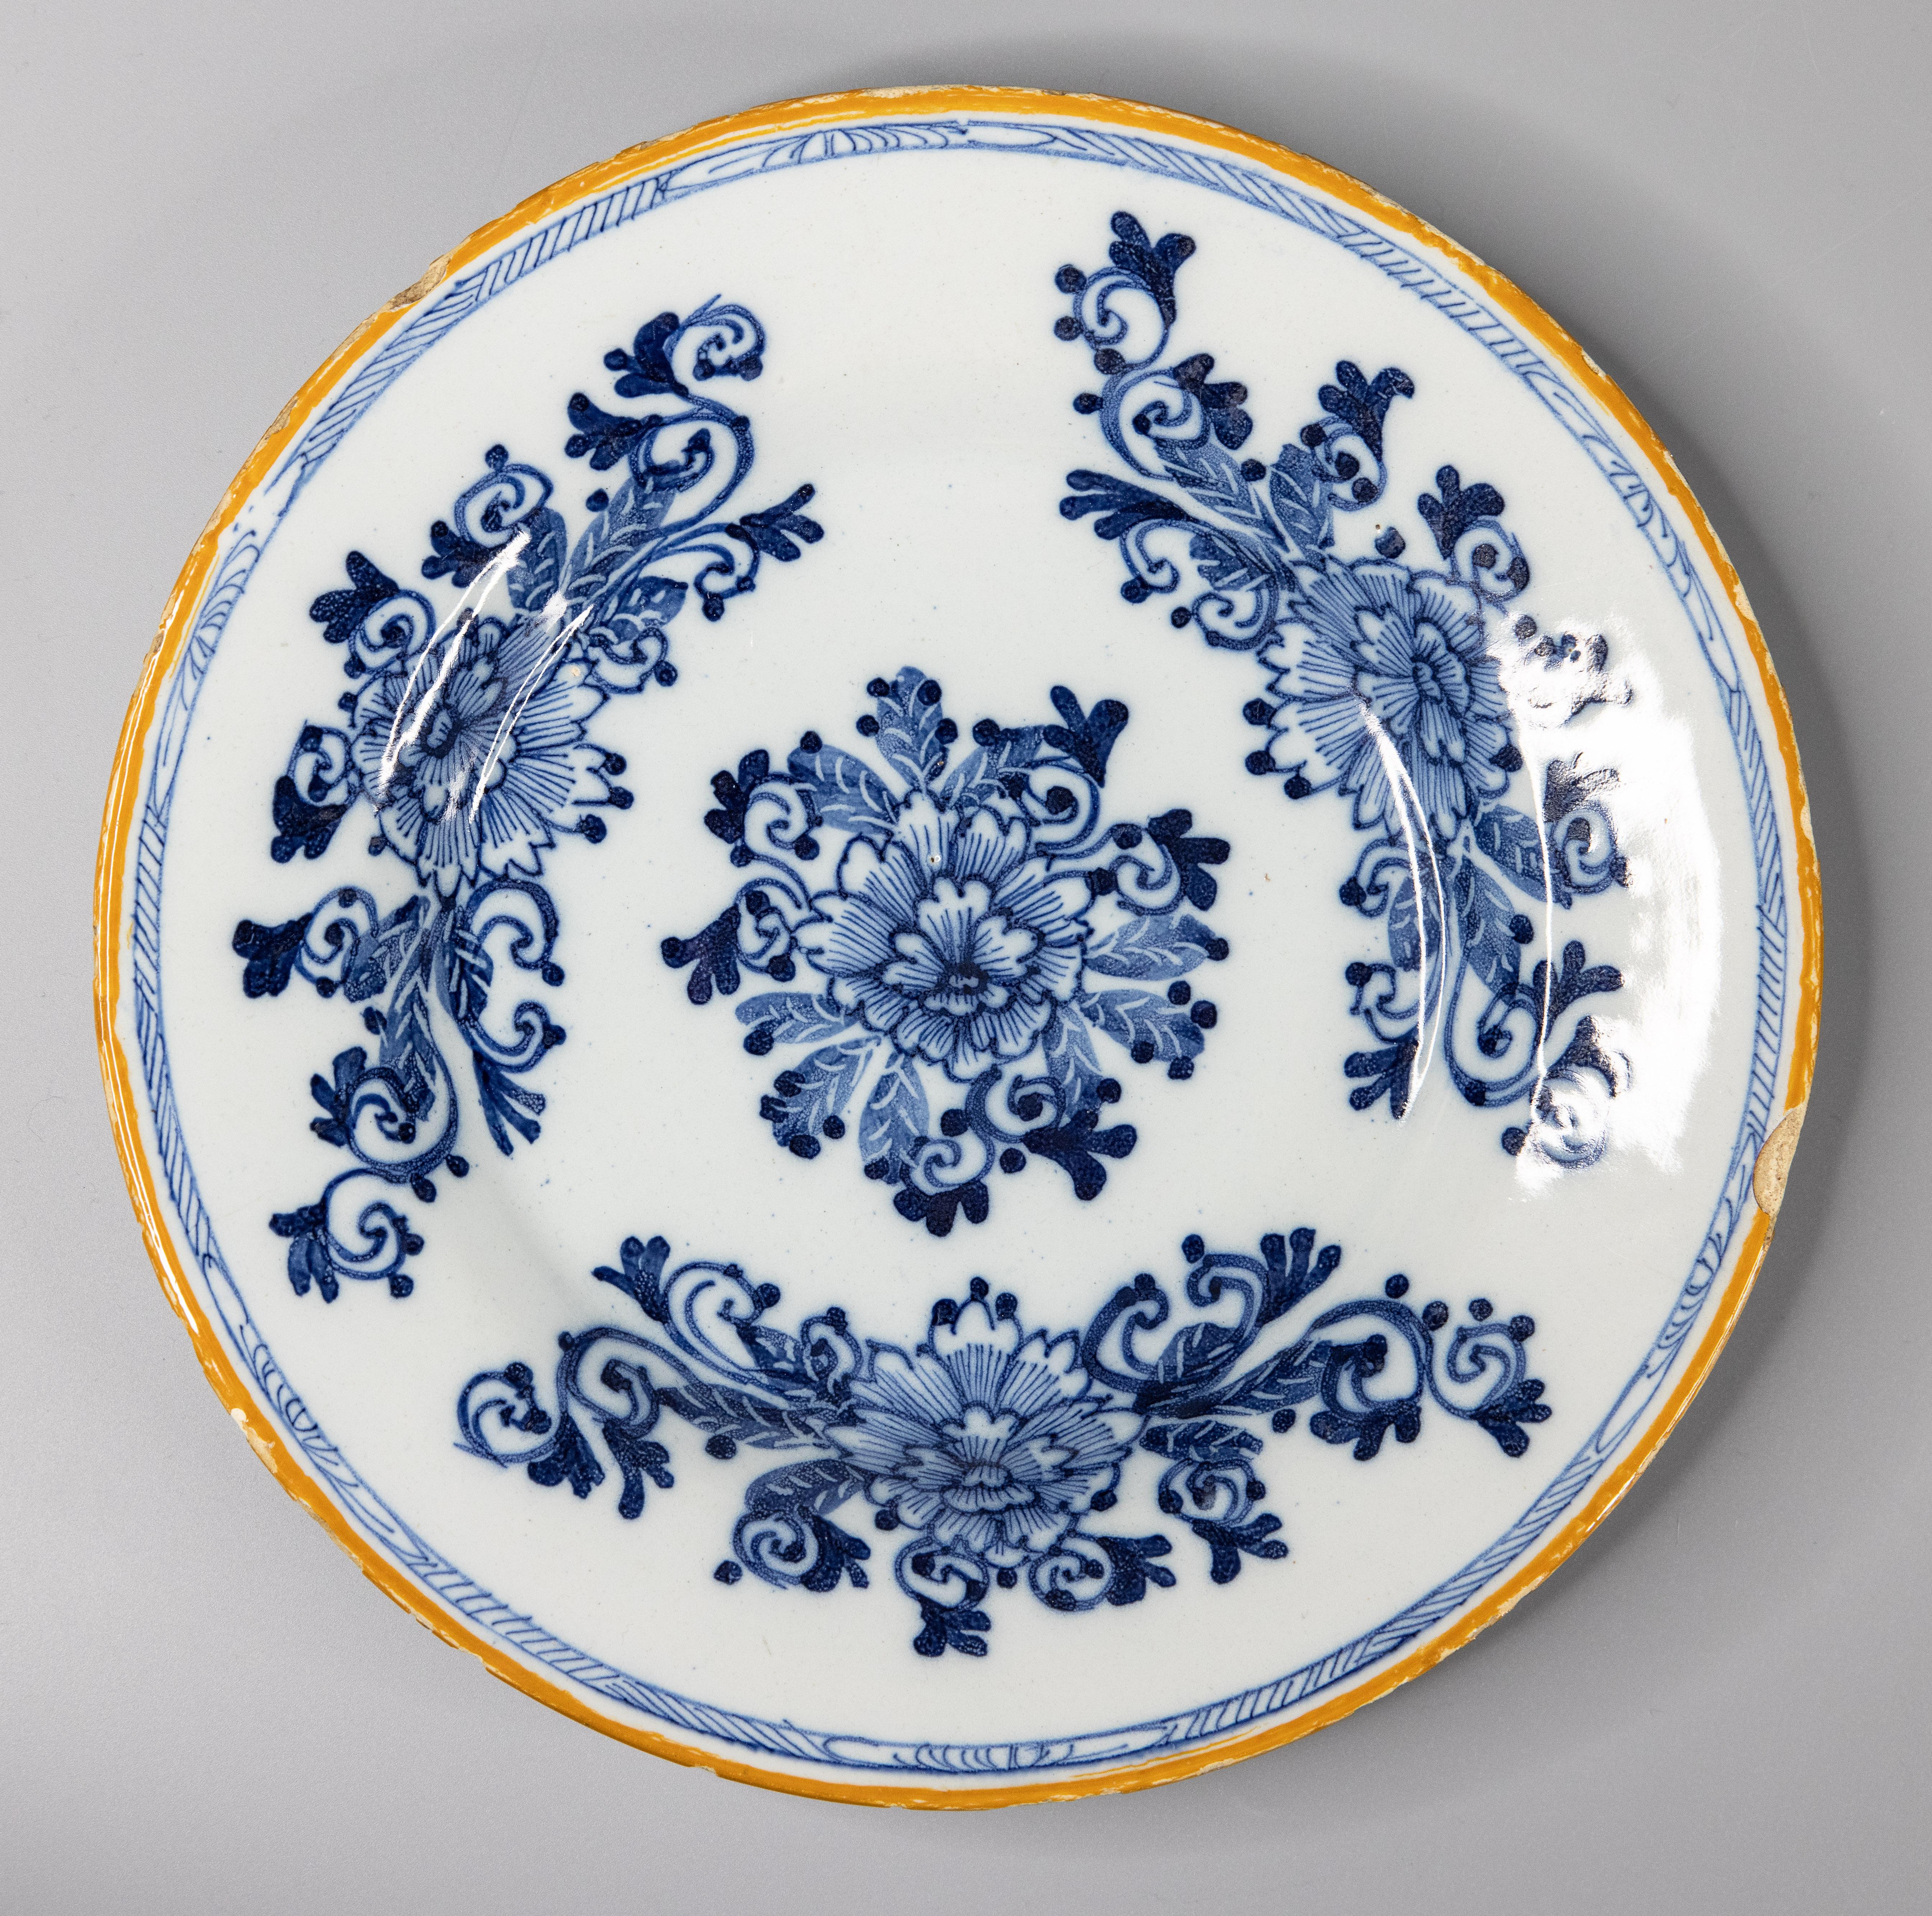 A lovely pair of antique 18th-Century Dutch Delft hand painted floral plates in vibrant cobalt blue and white with a yellow gold rim, circa 1760. Maker's mark 